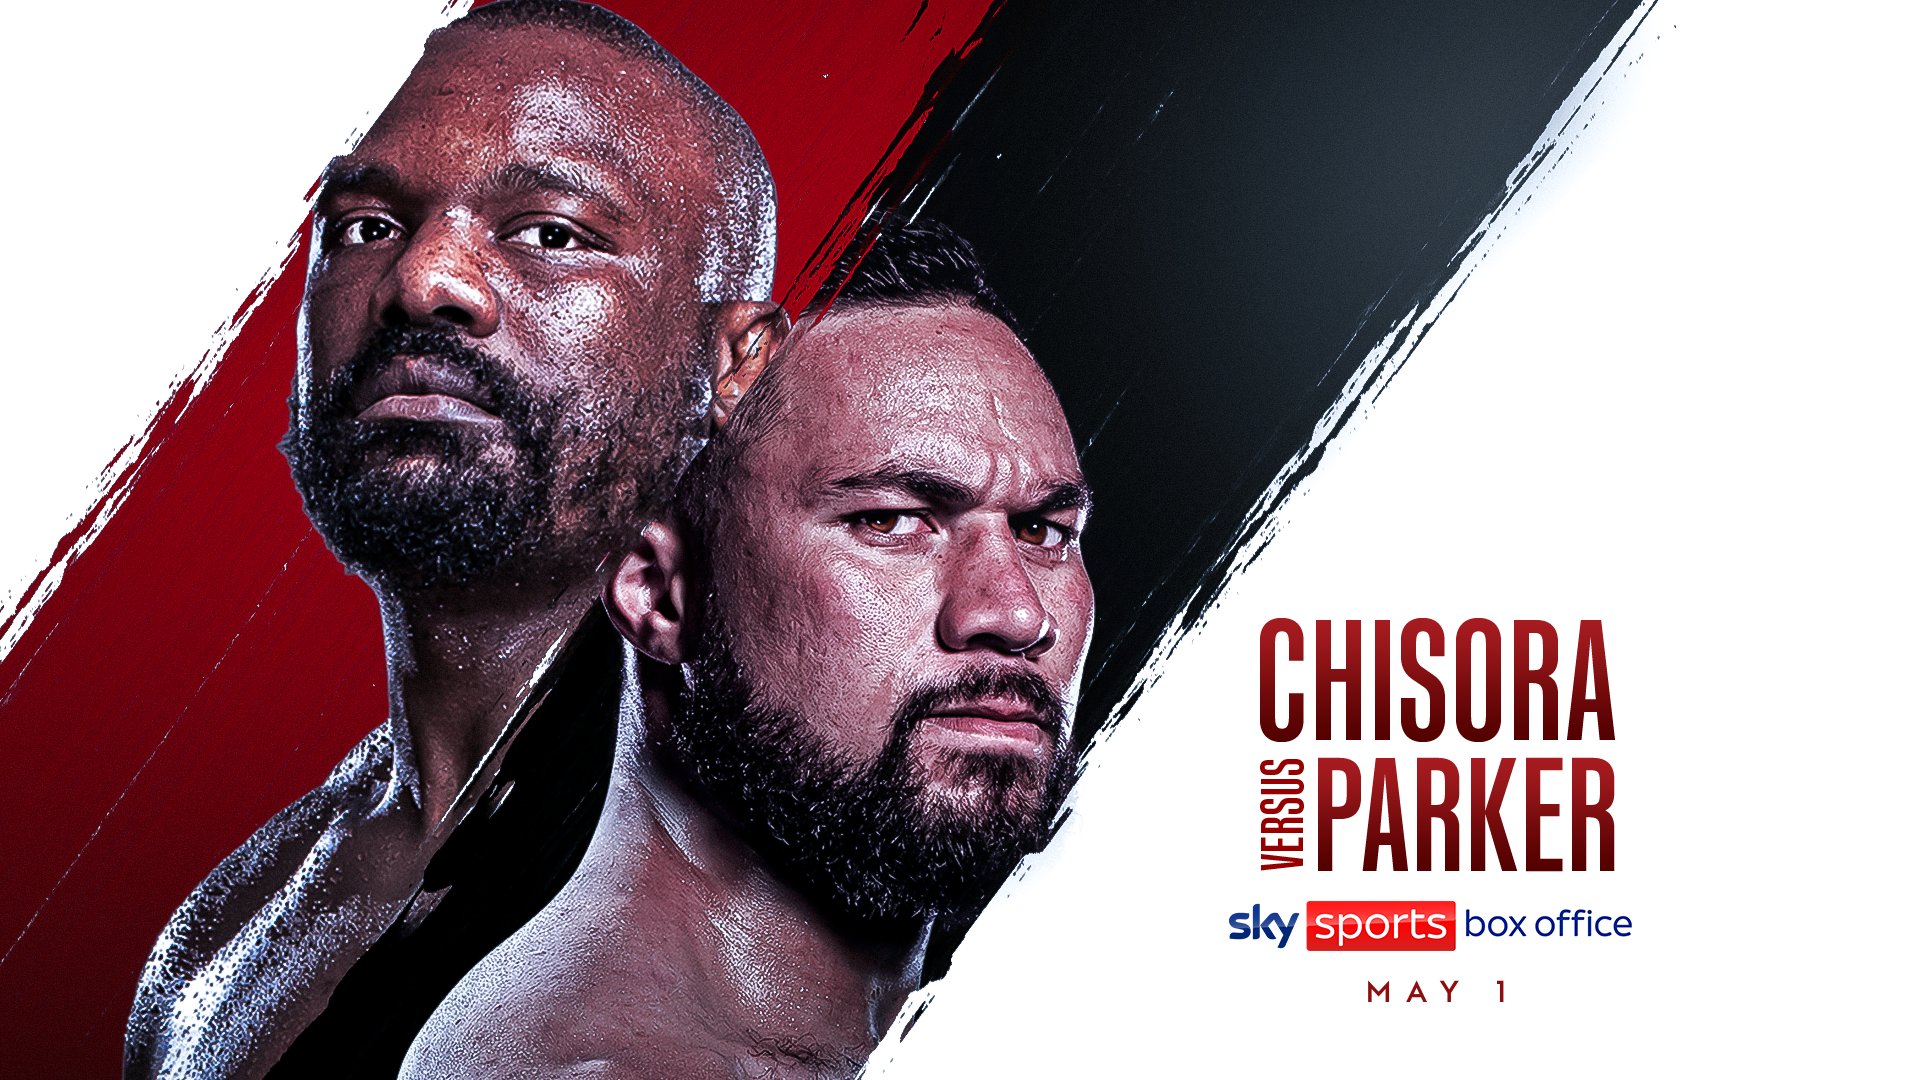 Image: Joseph Parker will retire Dereck Chisora on May 1st says Dave Higgins